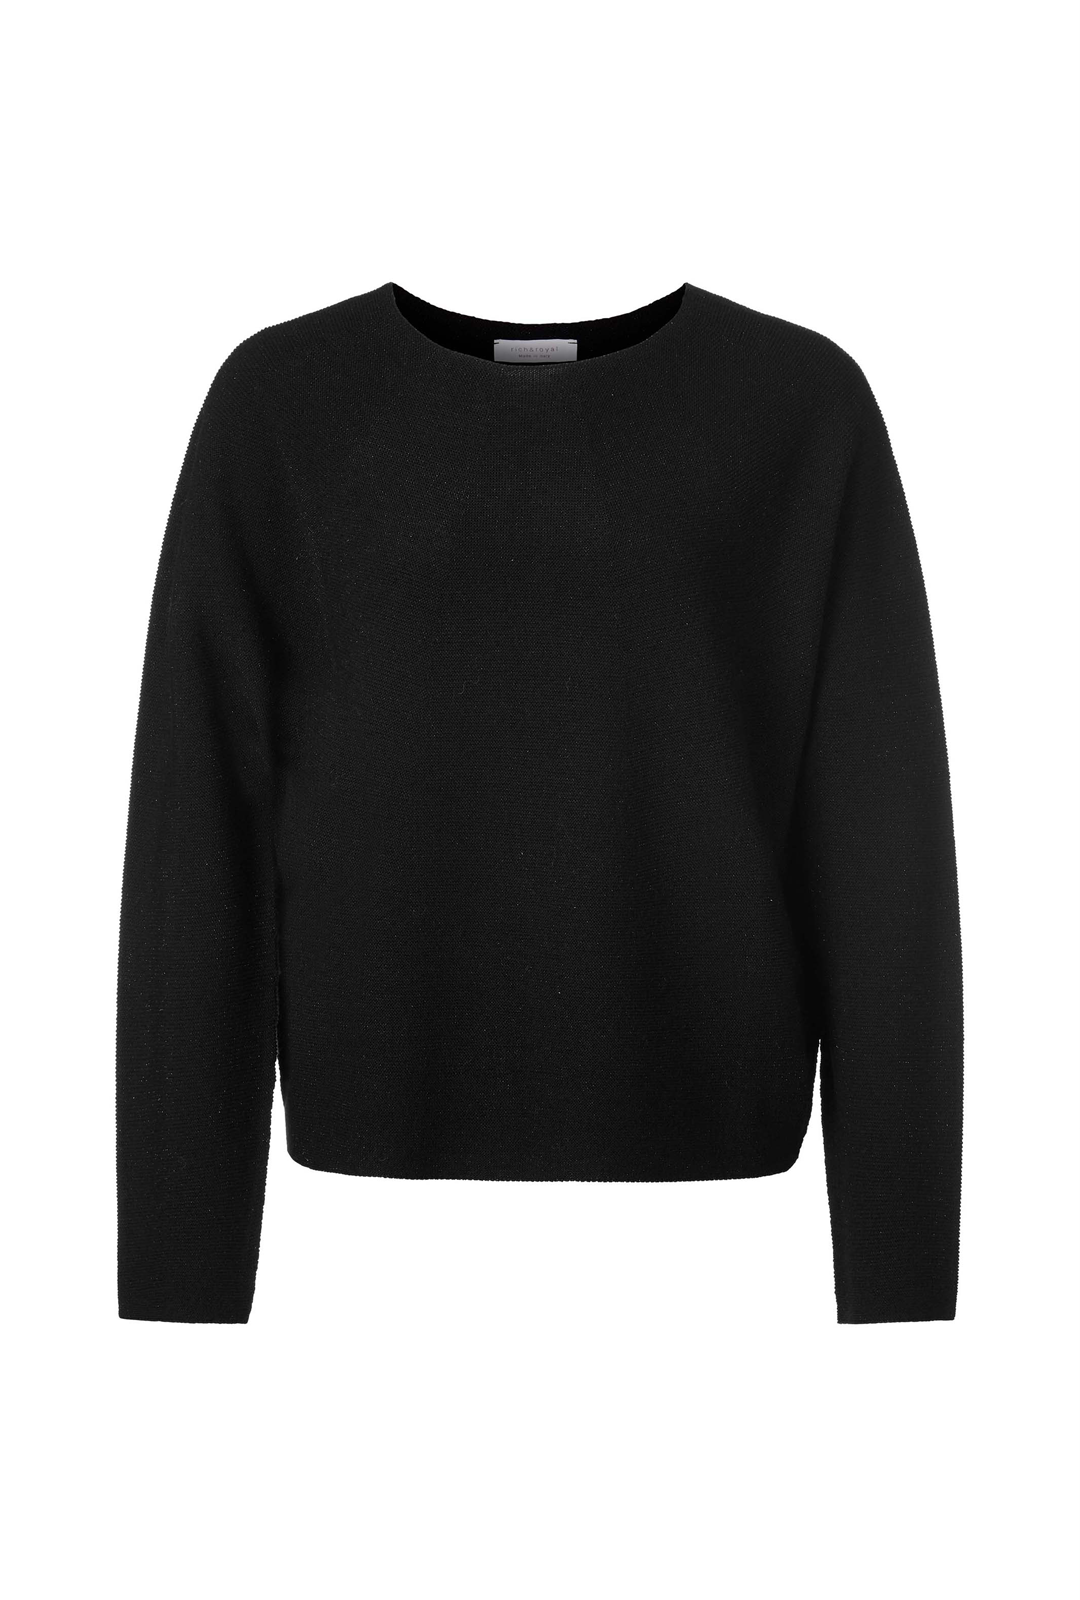 Seamless shniy jumper with boat nec